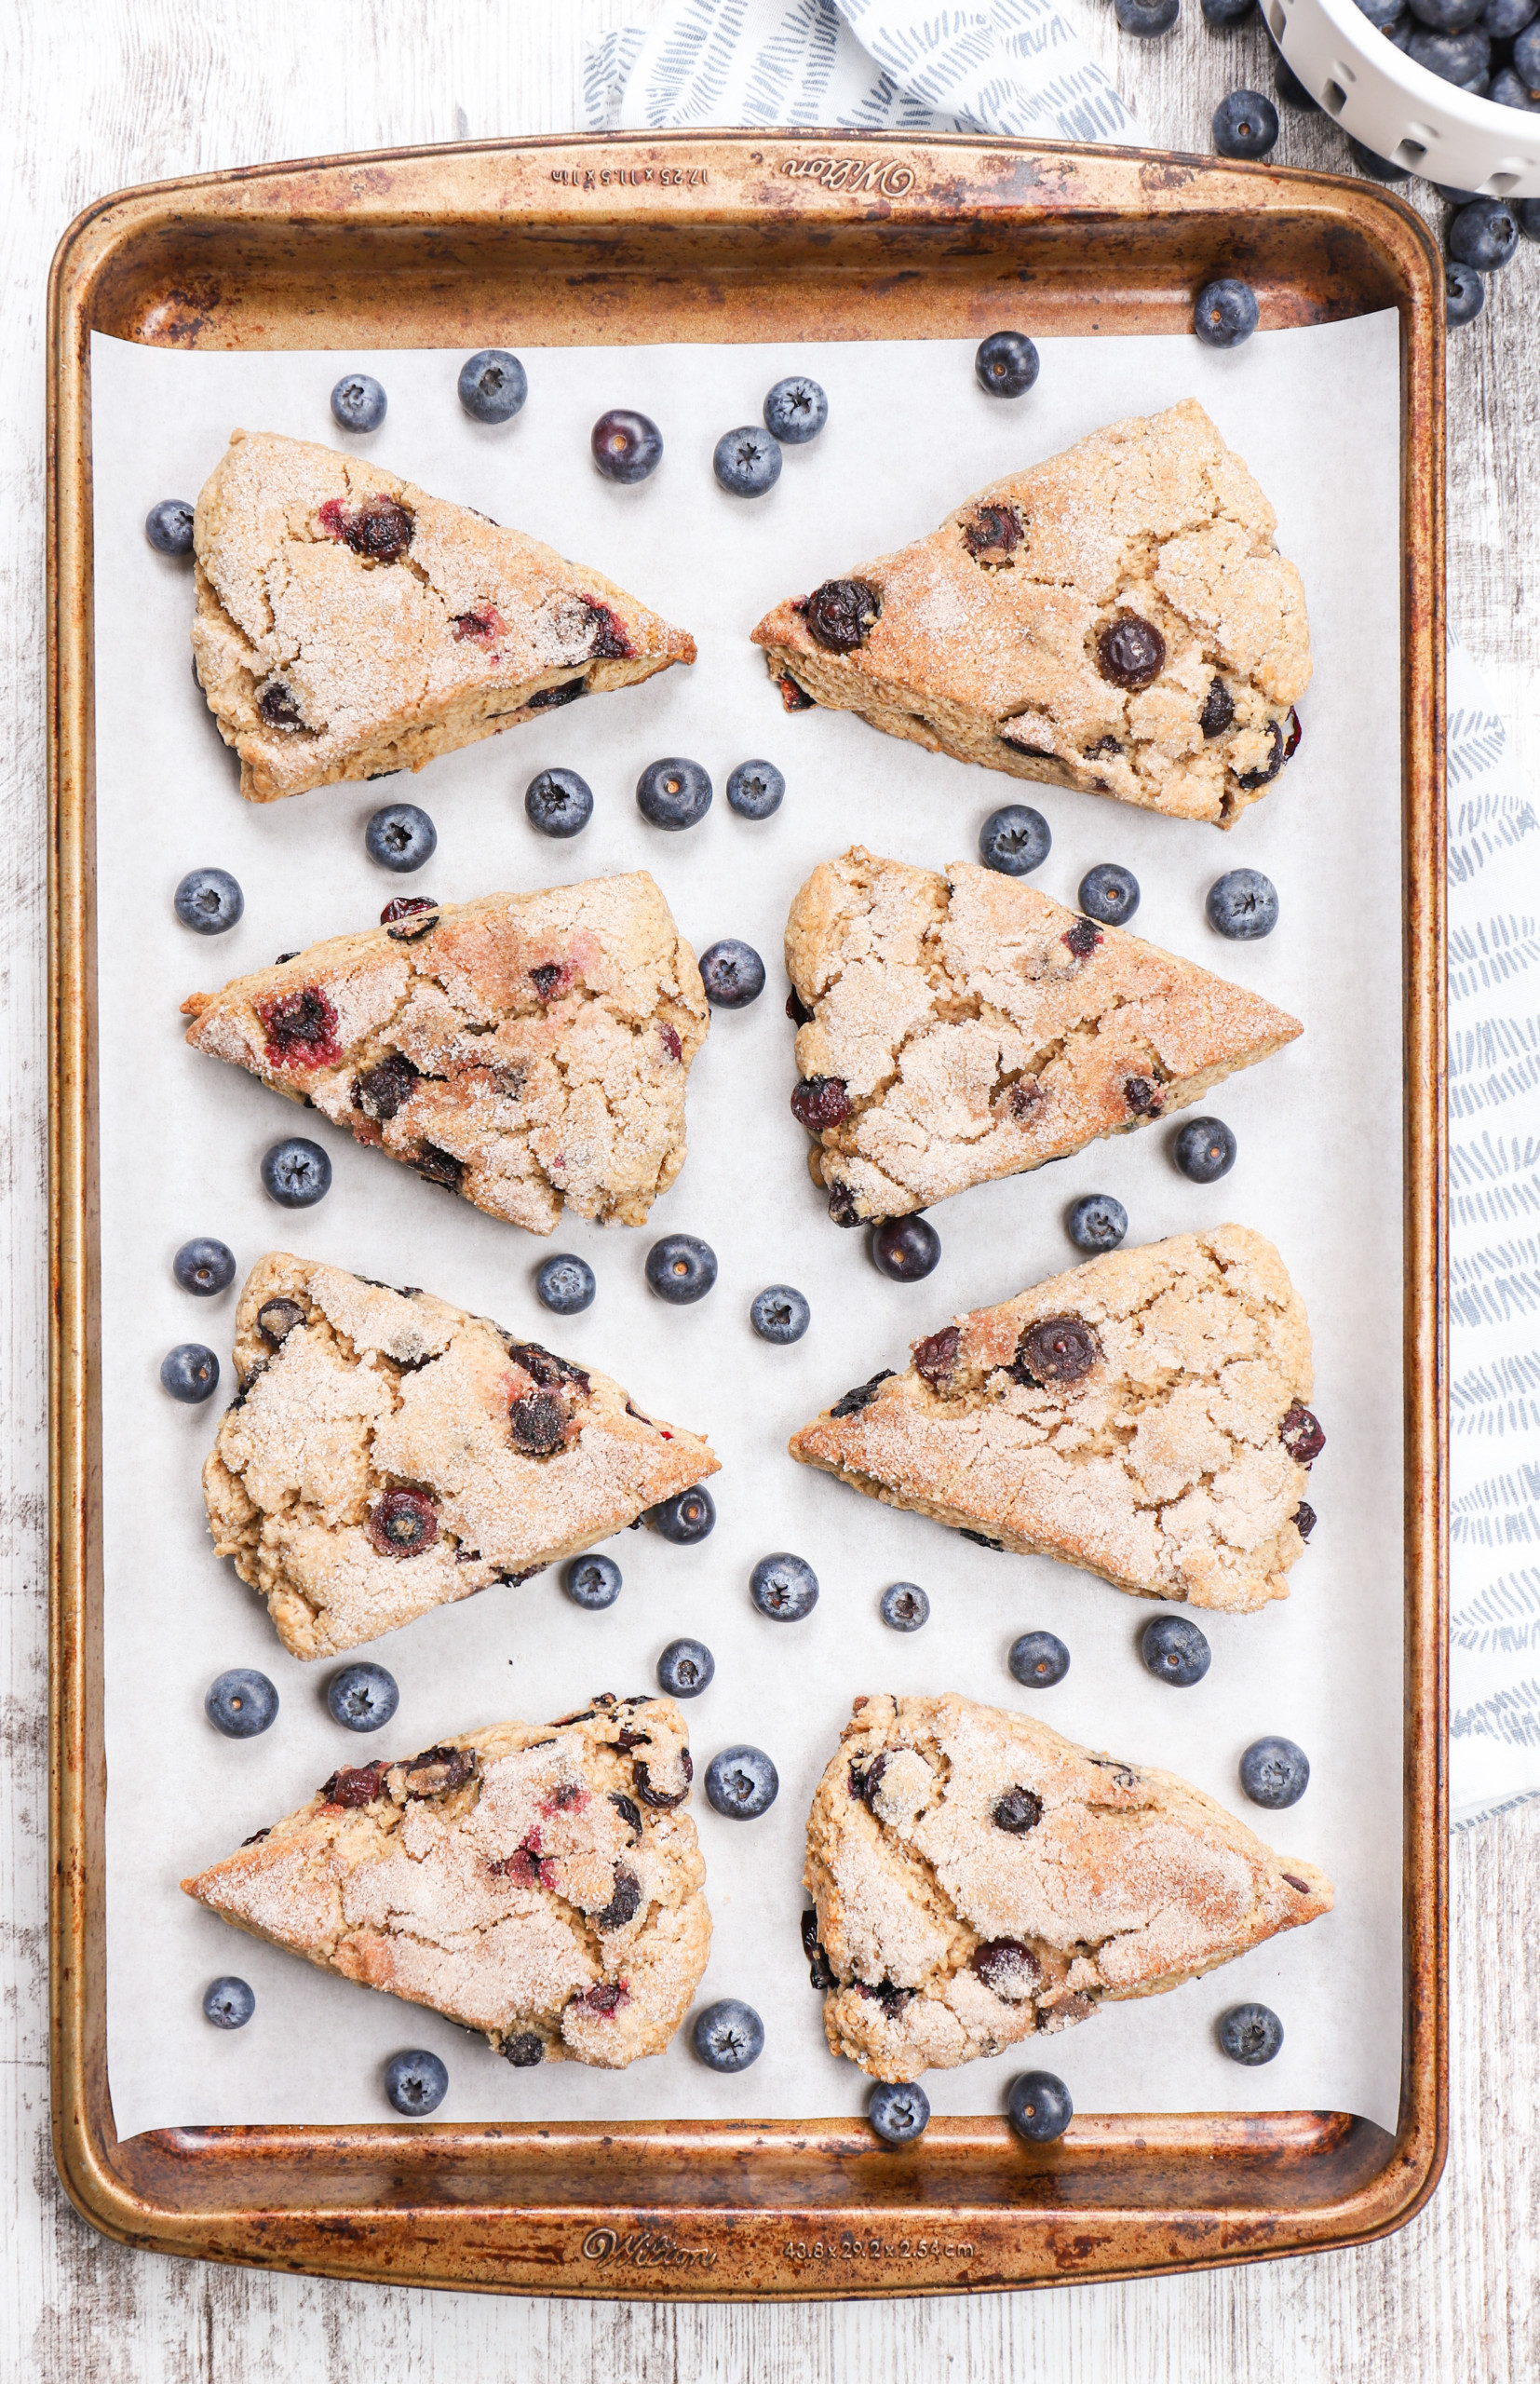 Overhead view of a batch of blueberry snickerdoodle scones on a parchment paper lined baking sheet.